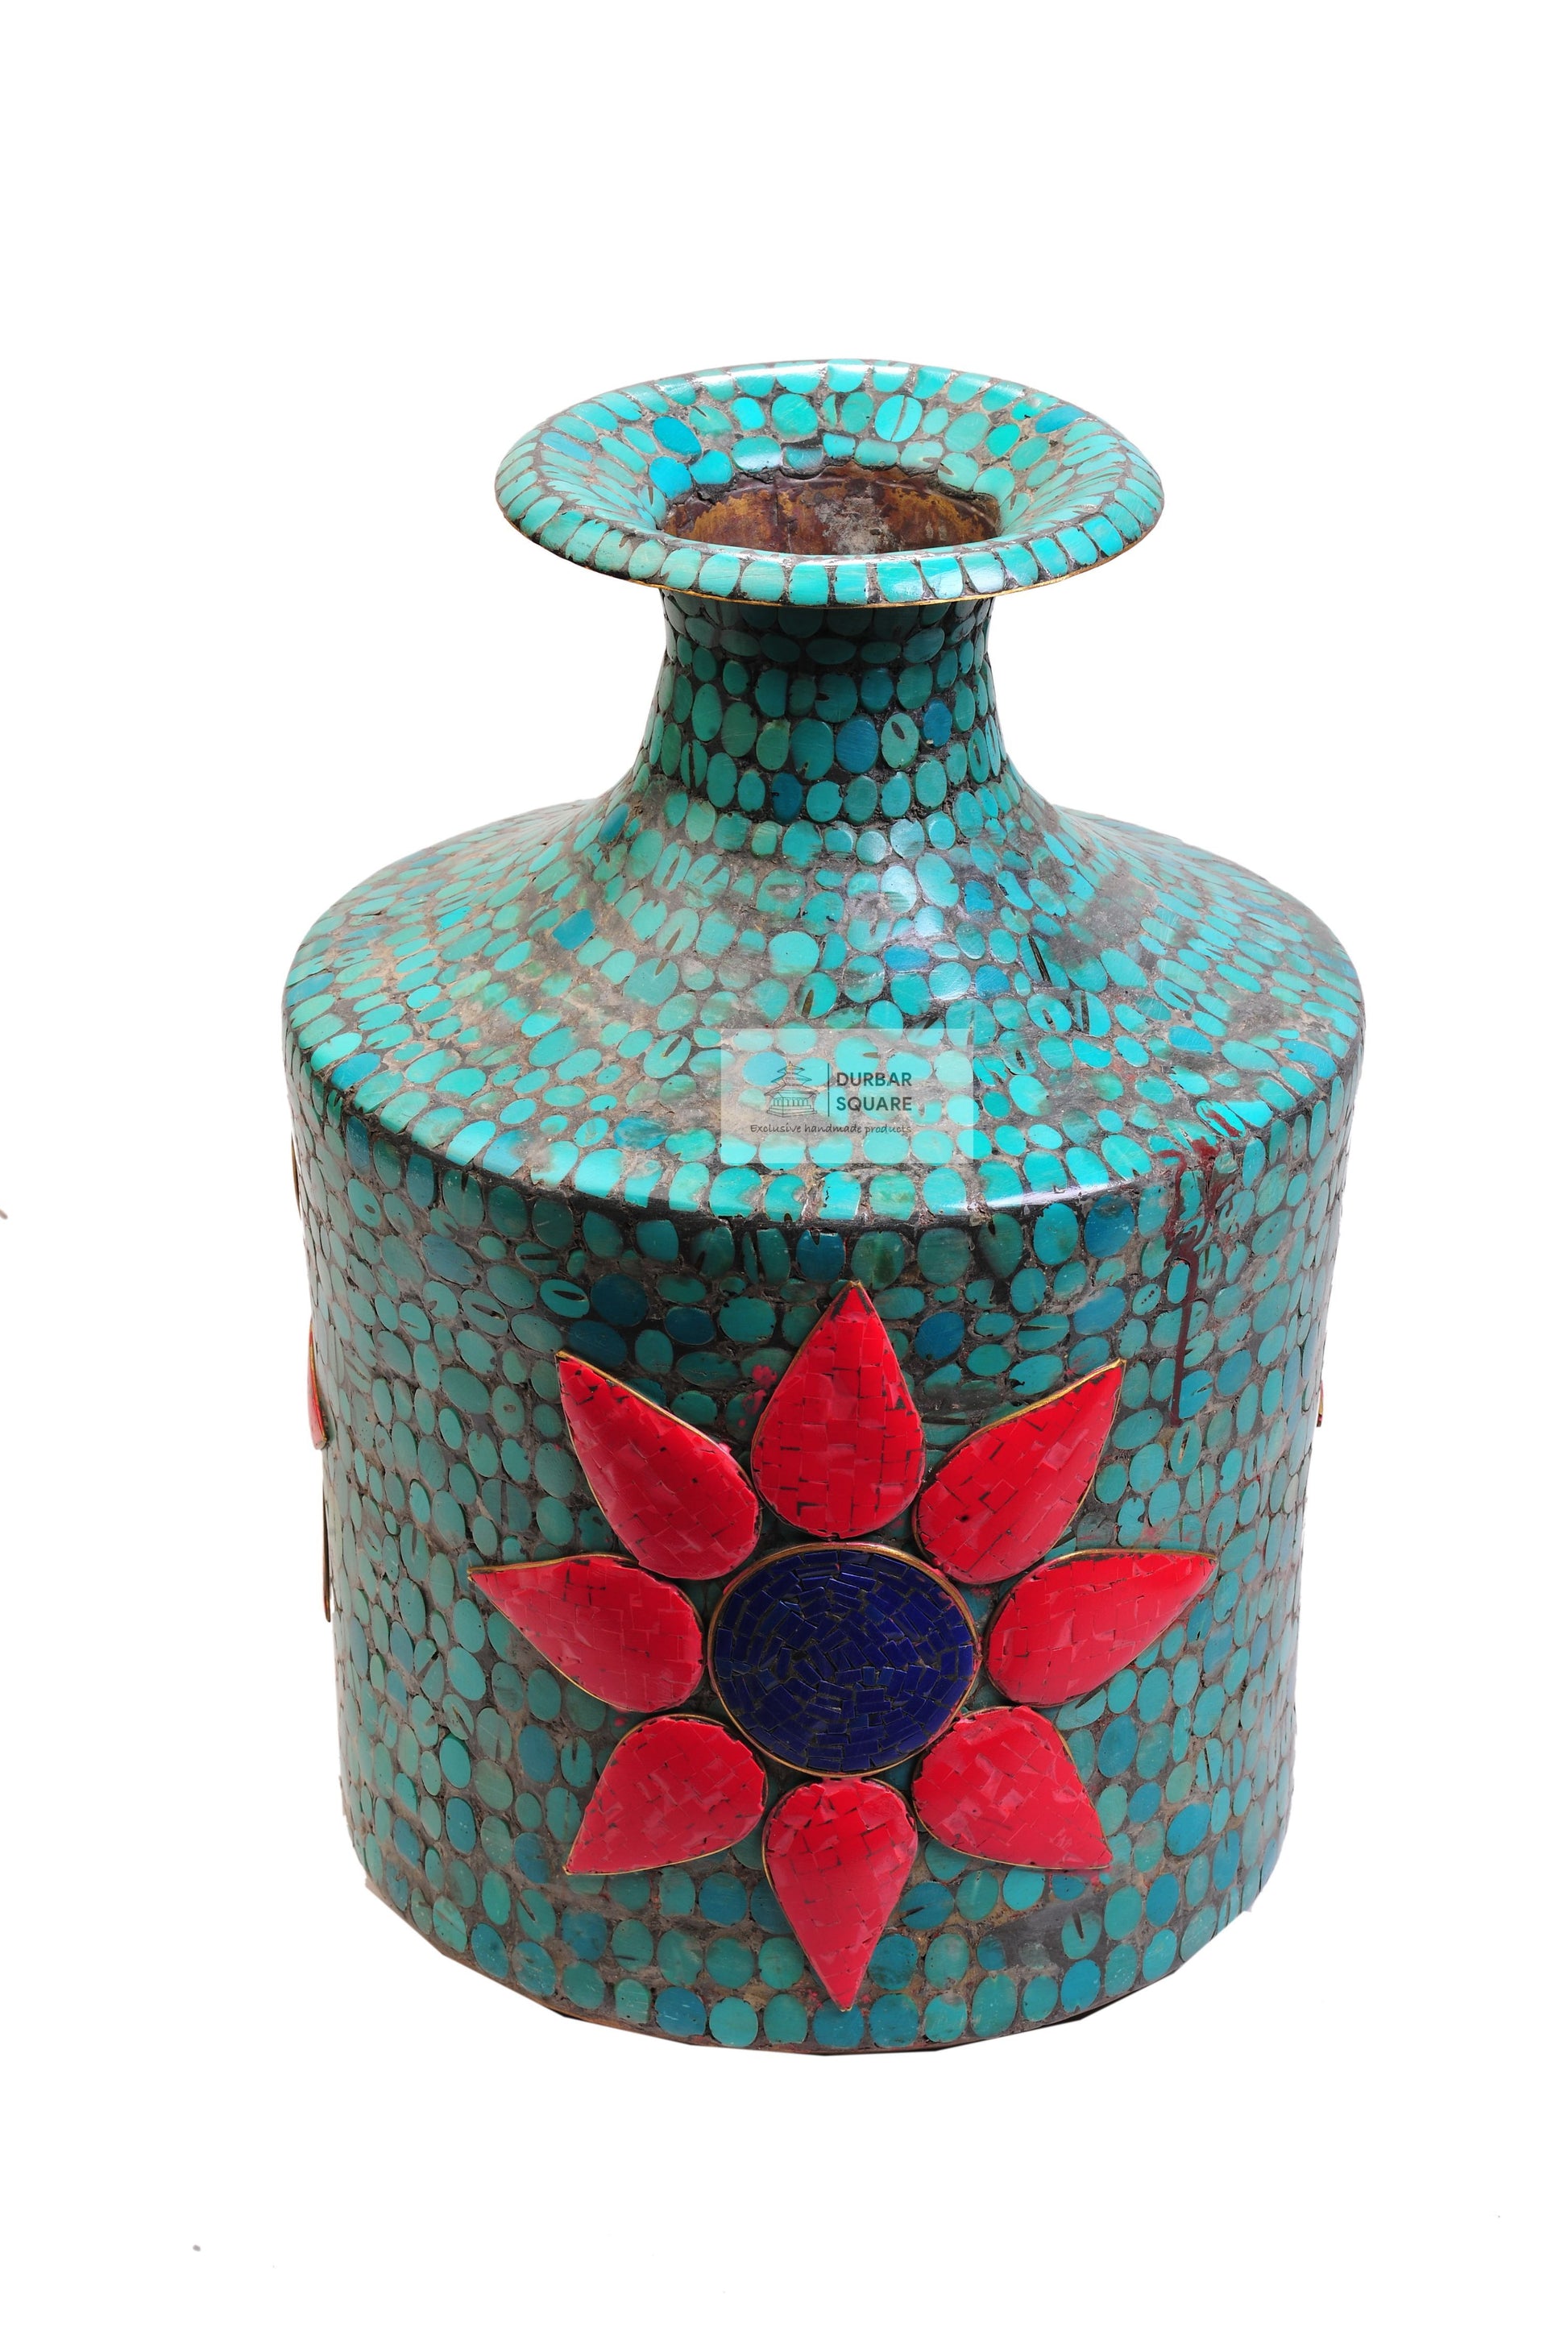 Turquoise Coral Ghagri (Water Pot)